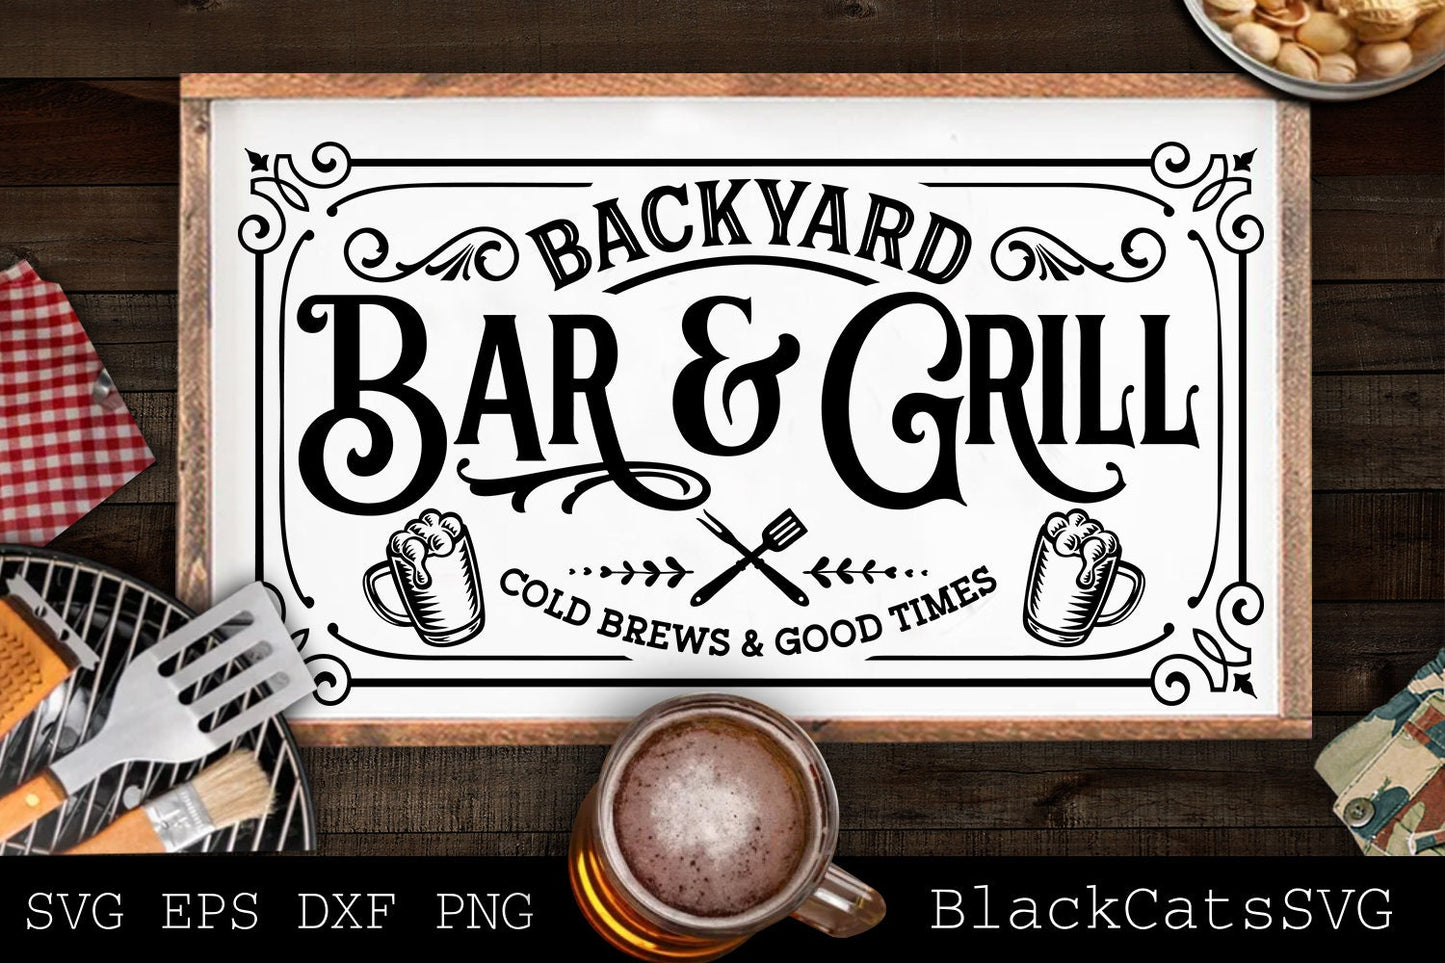 Backyard bar and grill svg, Grilling svg, BBQ Svg, Dad's Bar and Grill svg, Father's day gift svg, Cold brews and good times svg